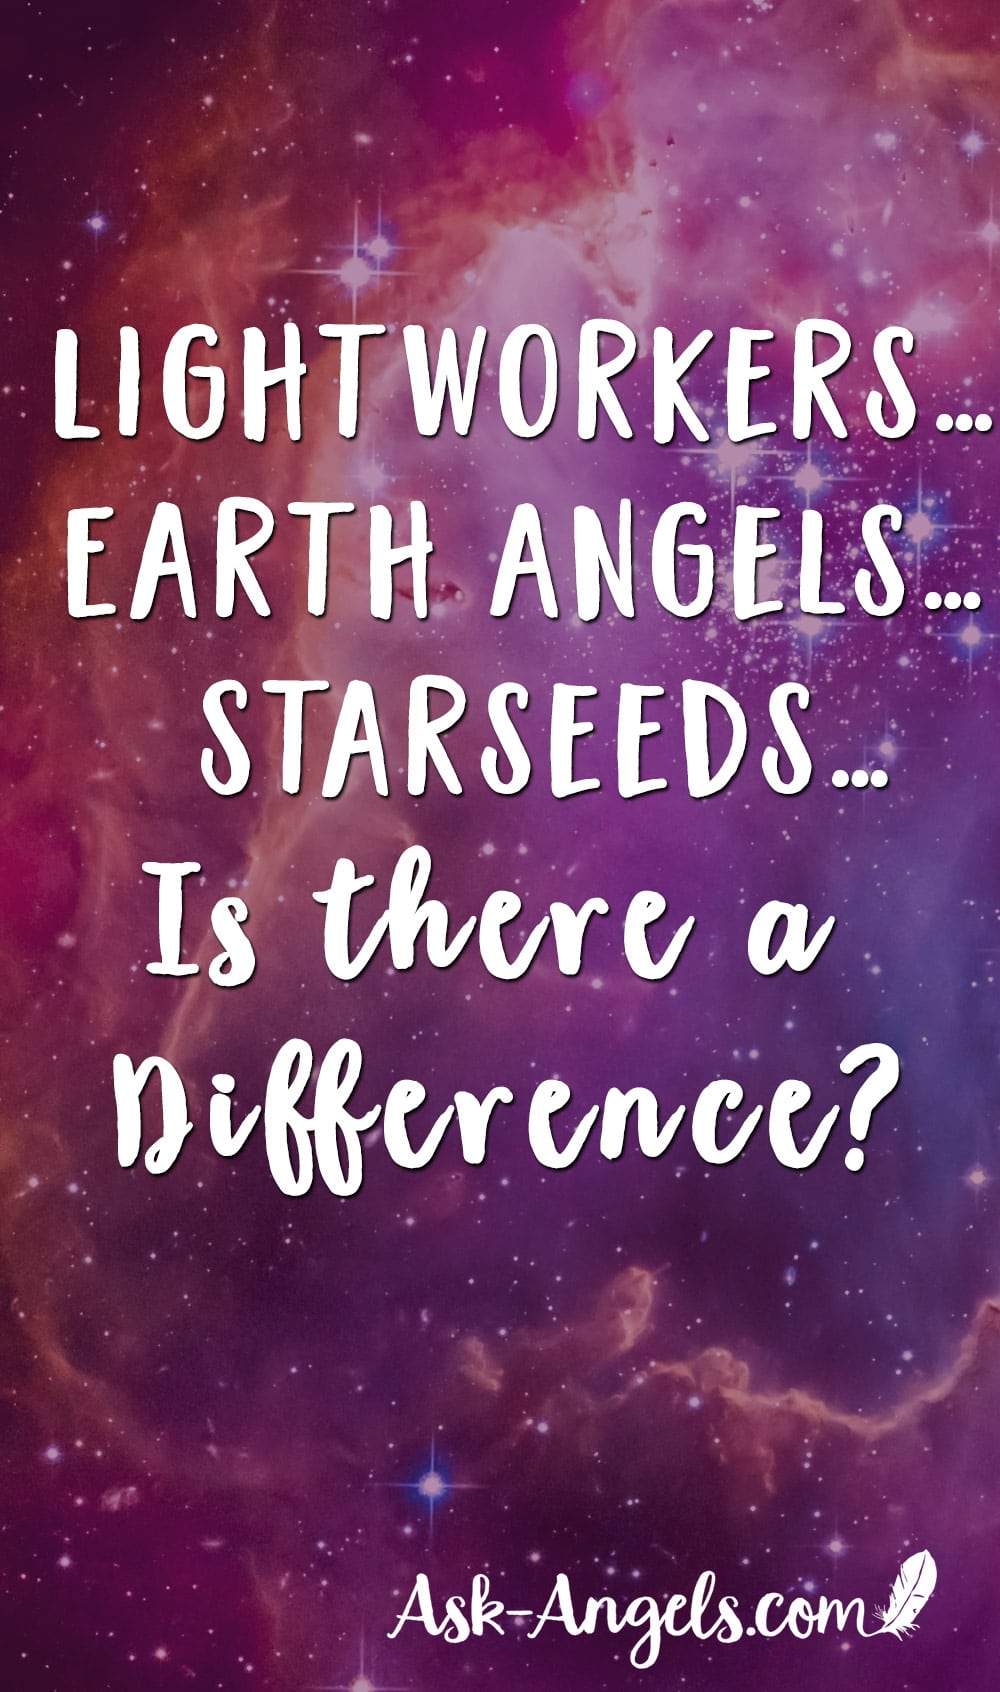 Lightworkers. Earth Angels. Starseeds. The same or different?